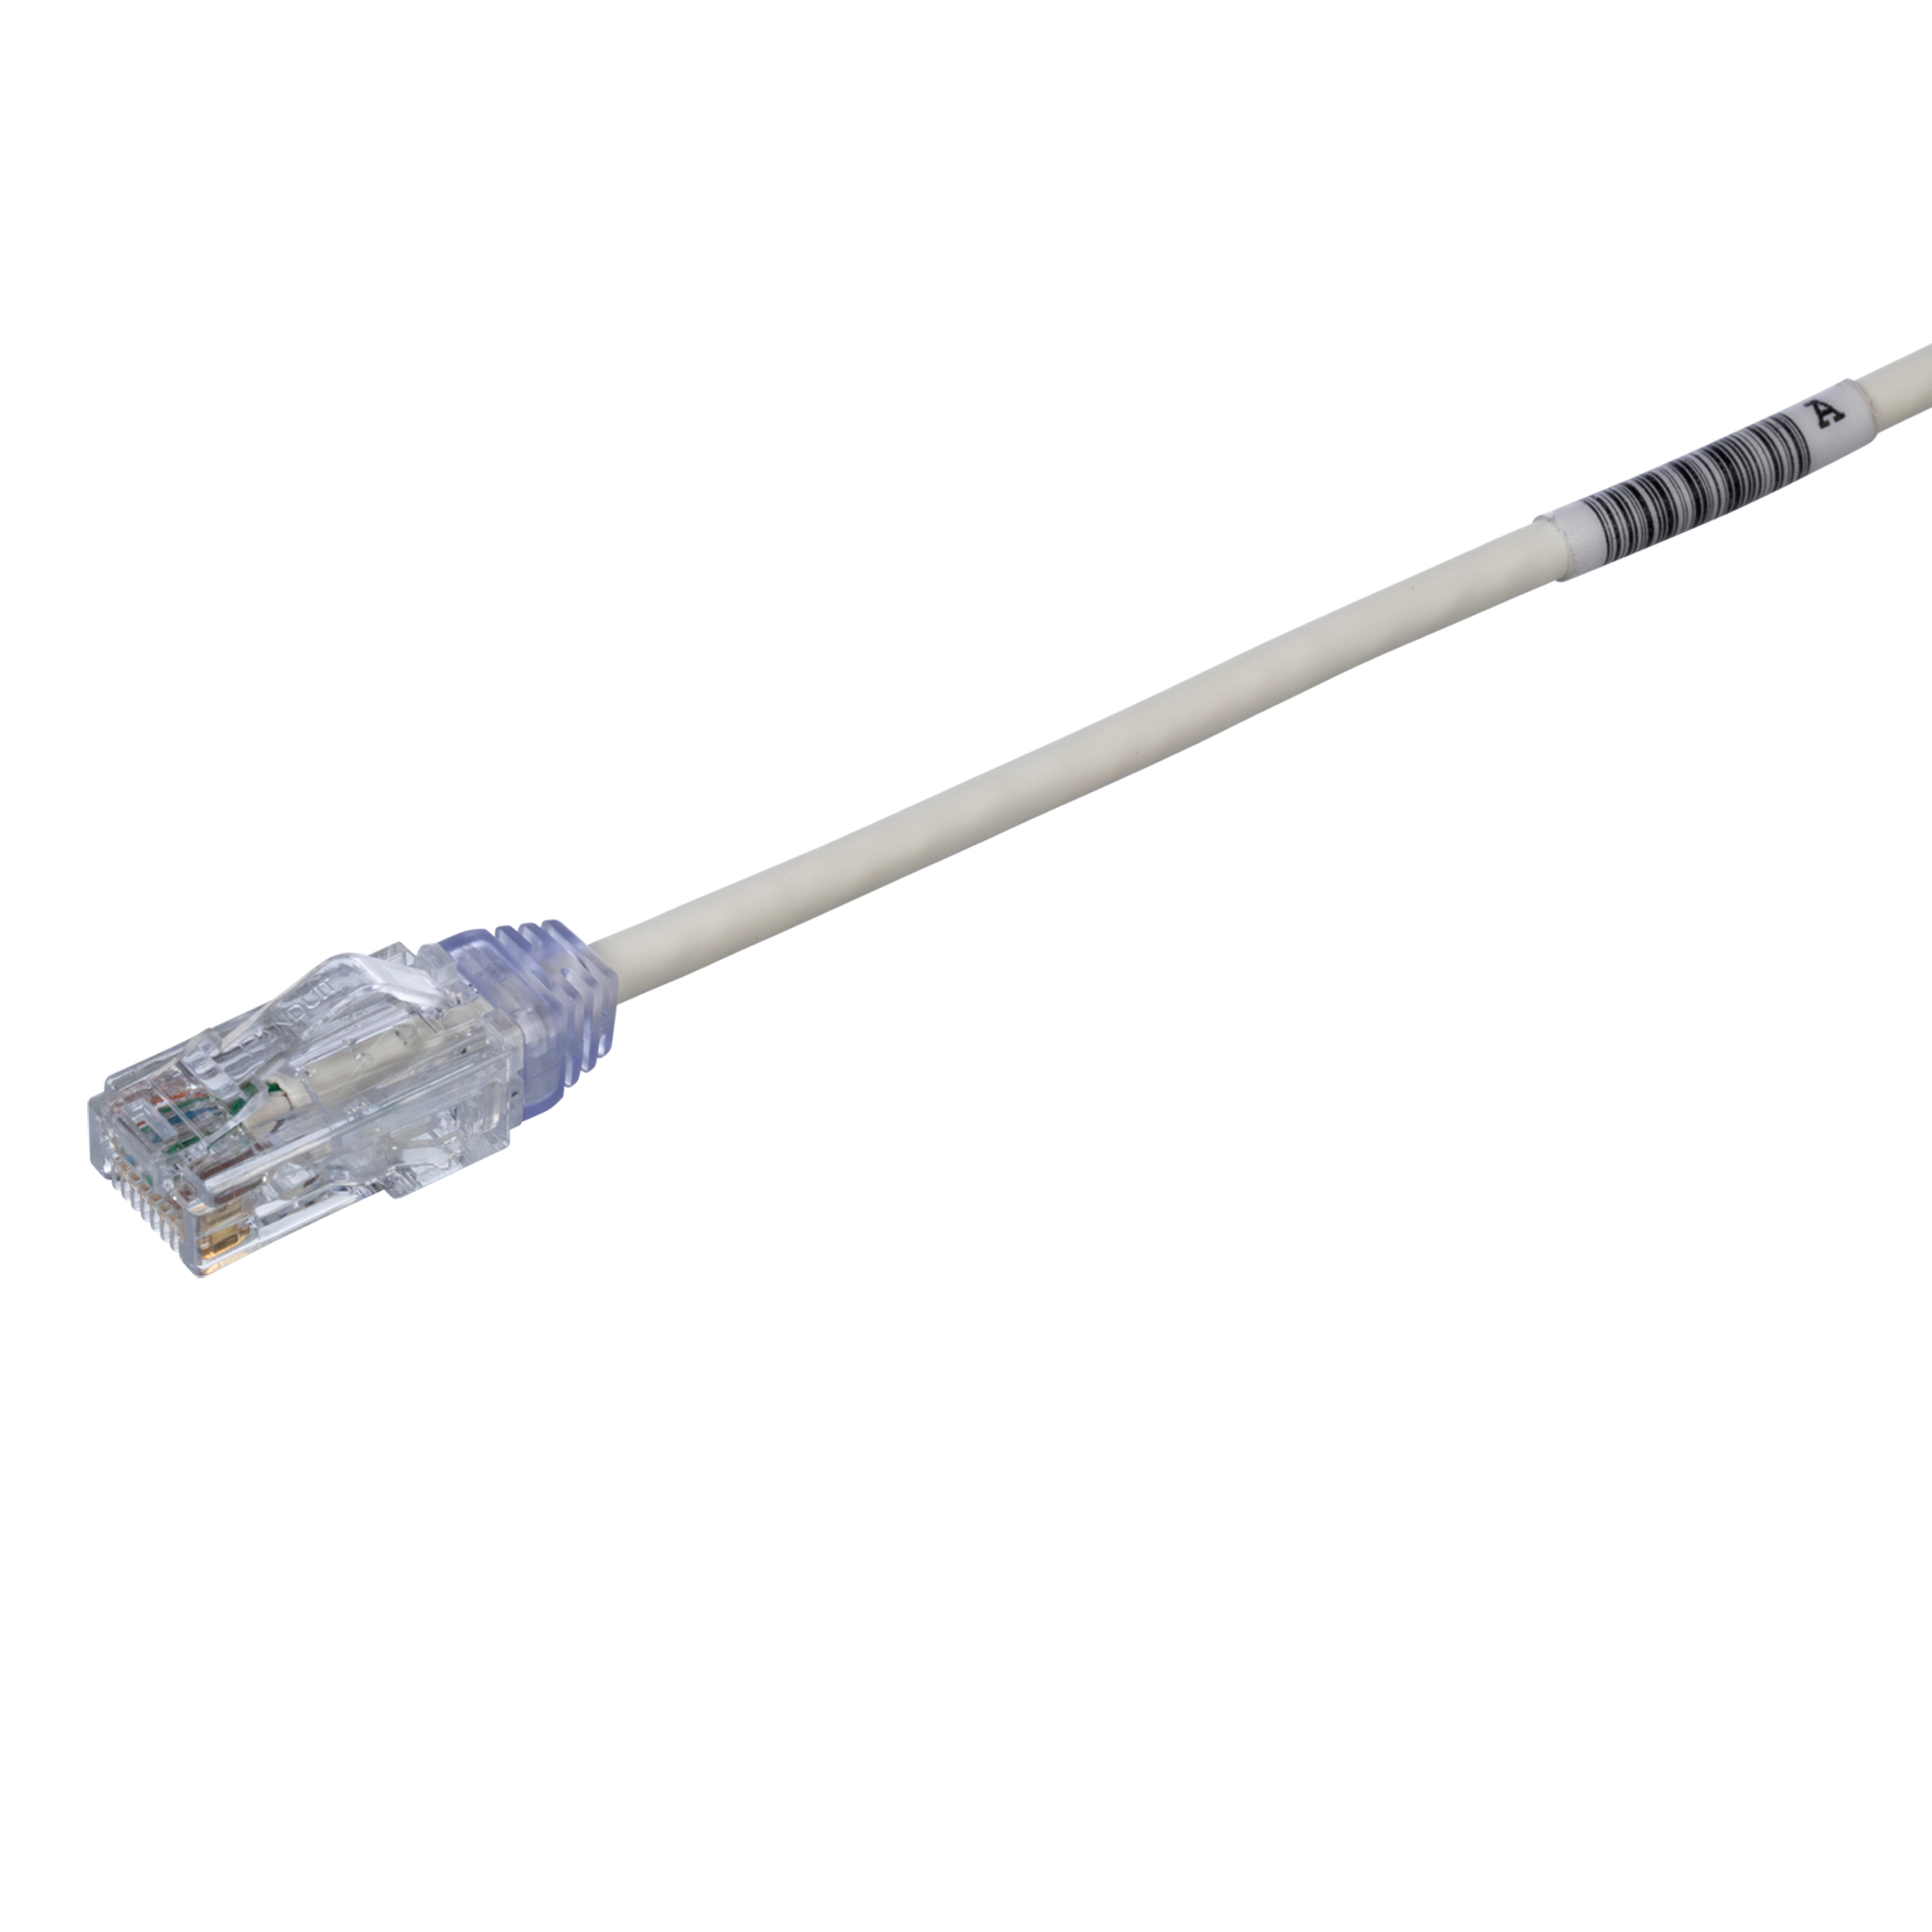 Cat 6 28 AWG UTP Copper Patch Cord, 10 ft, IW